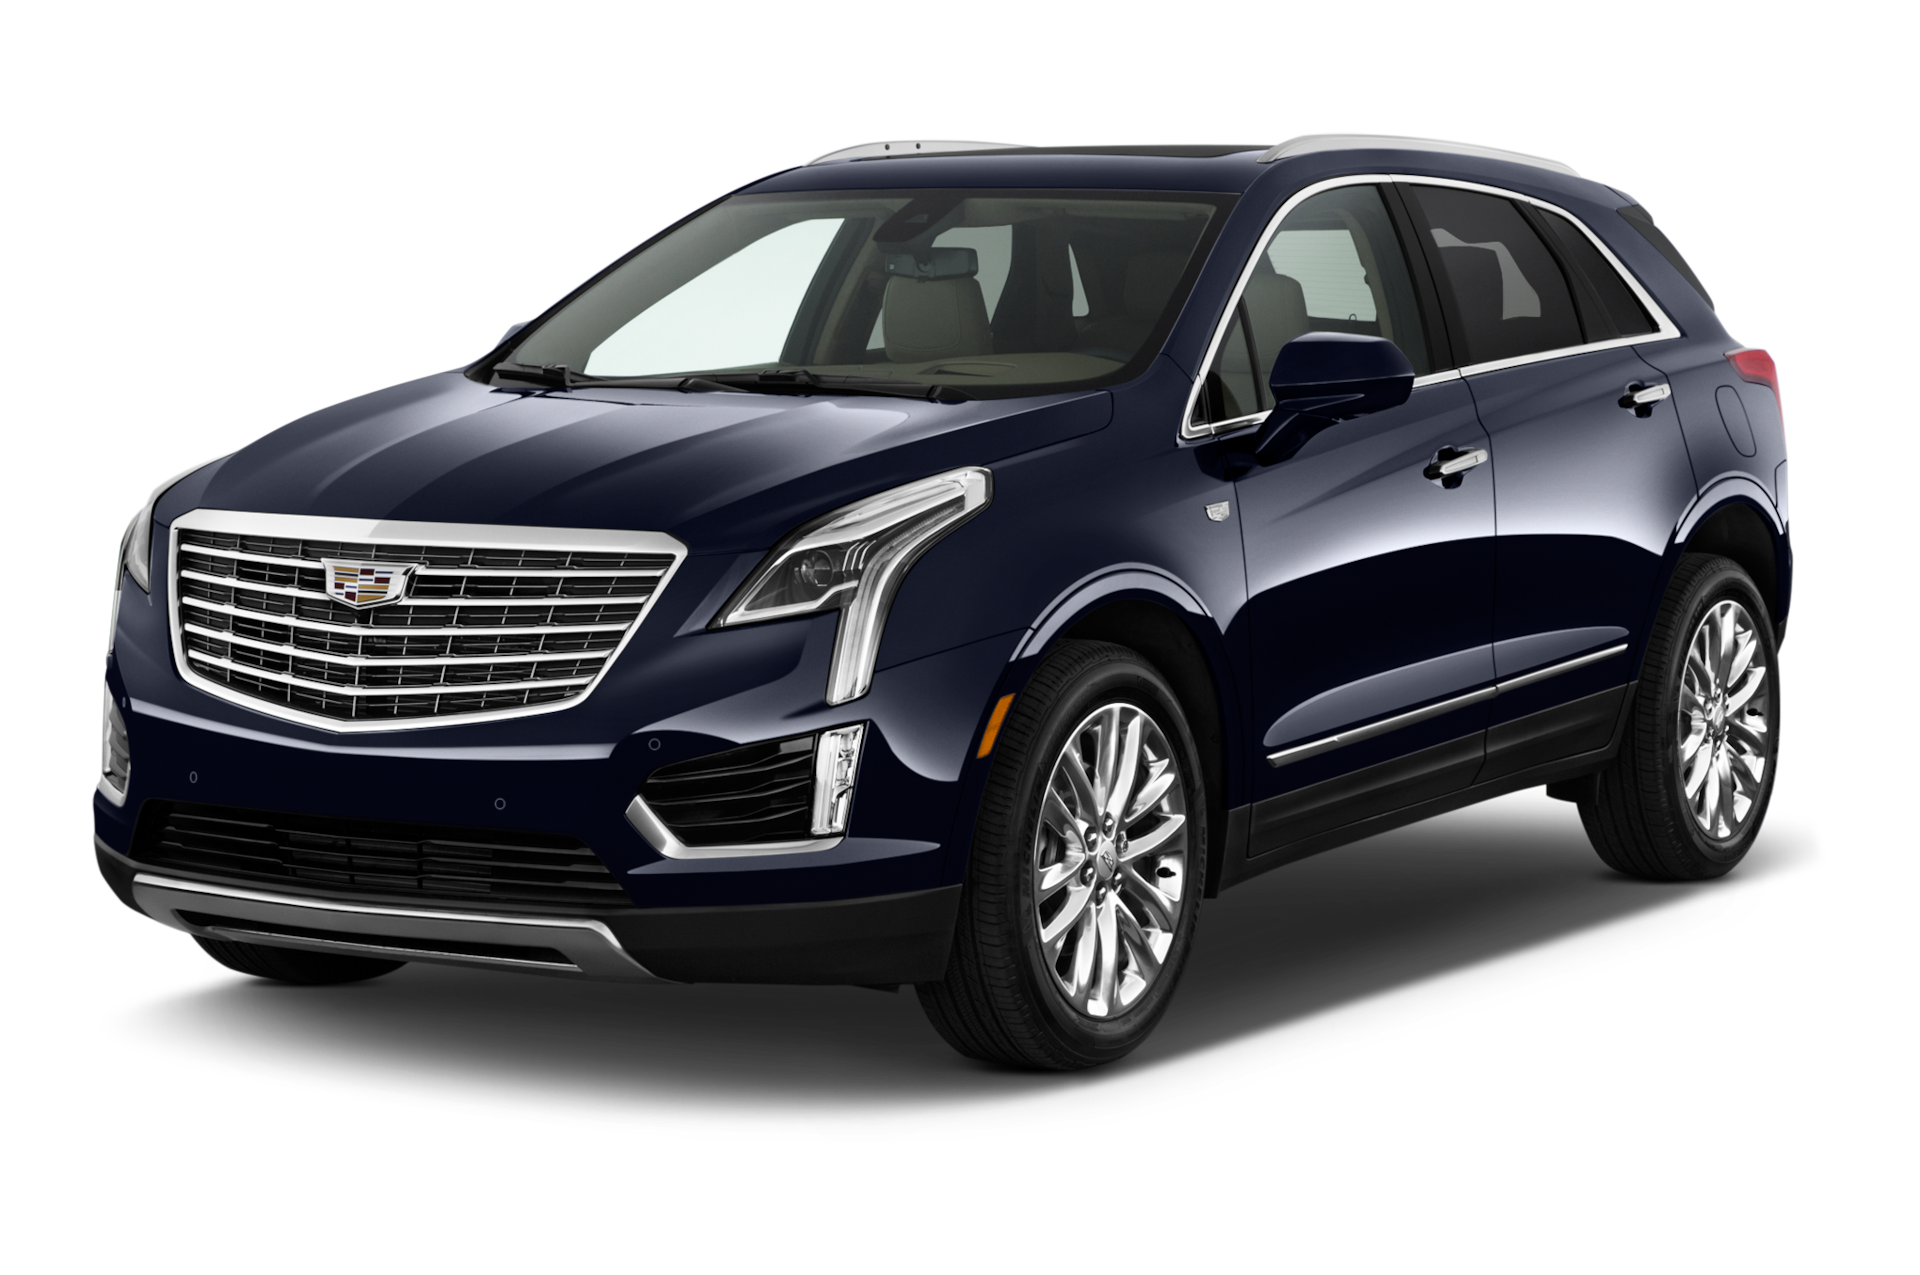 2018 Cadillac XT5 Prices, Reviews, and Photos - MotorTrend